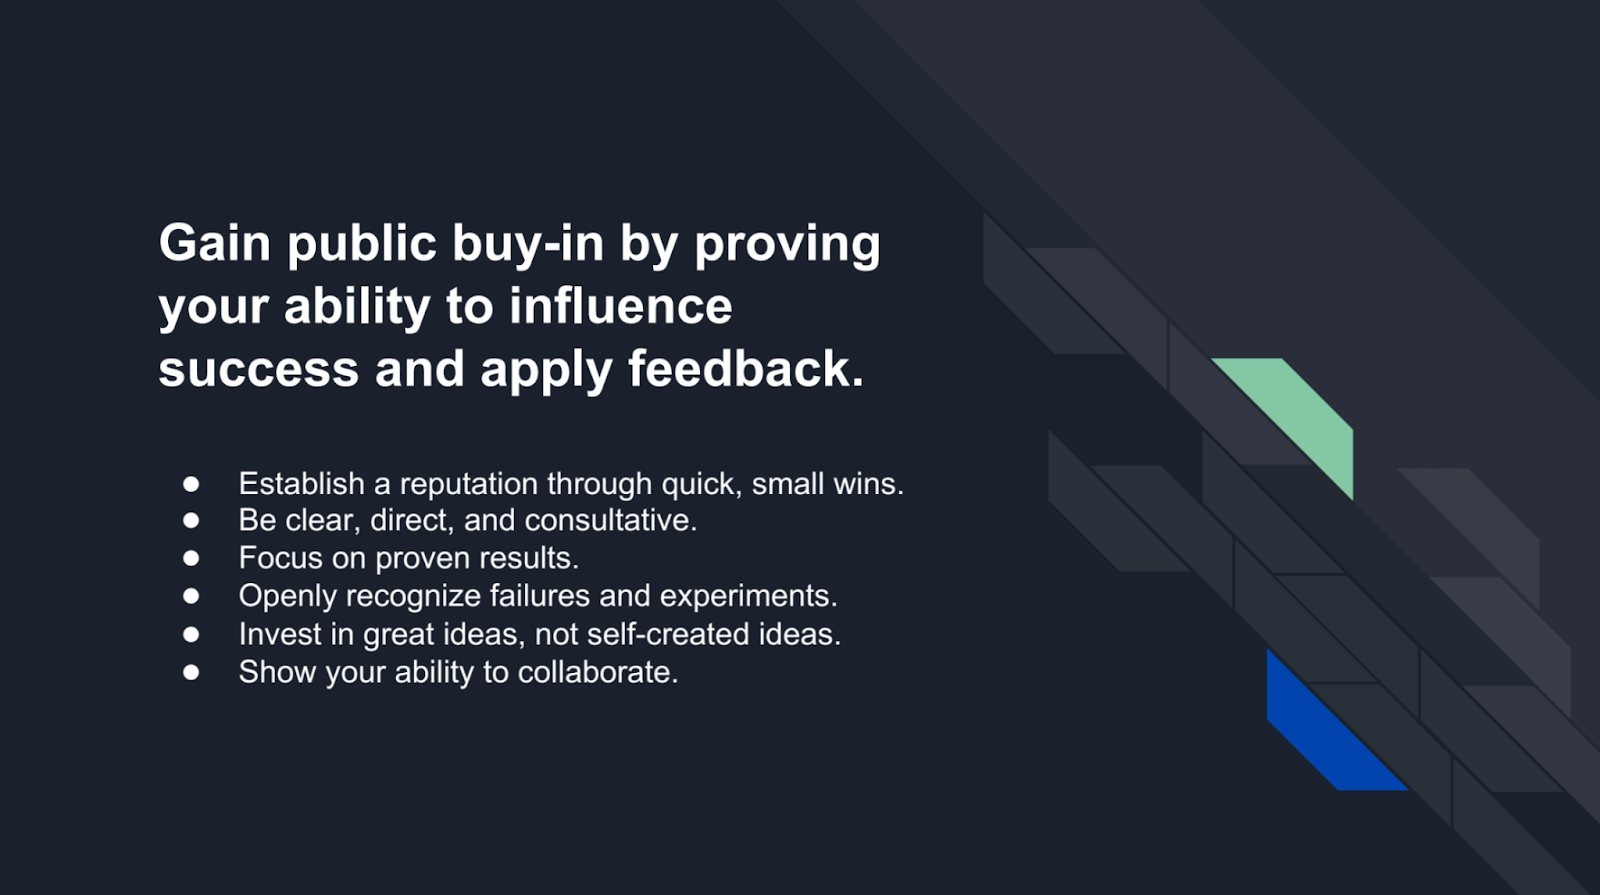 Gain public buy-in by proving your ability to influence success and apply feedback.